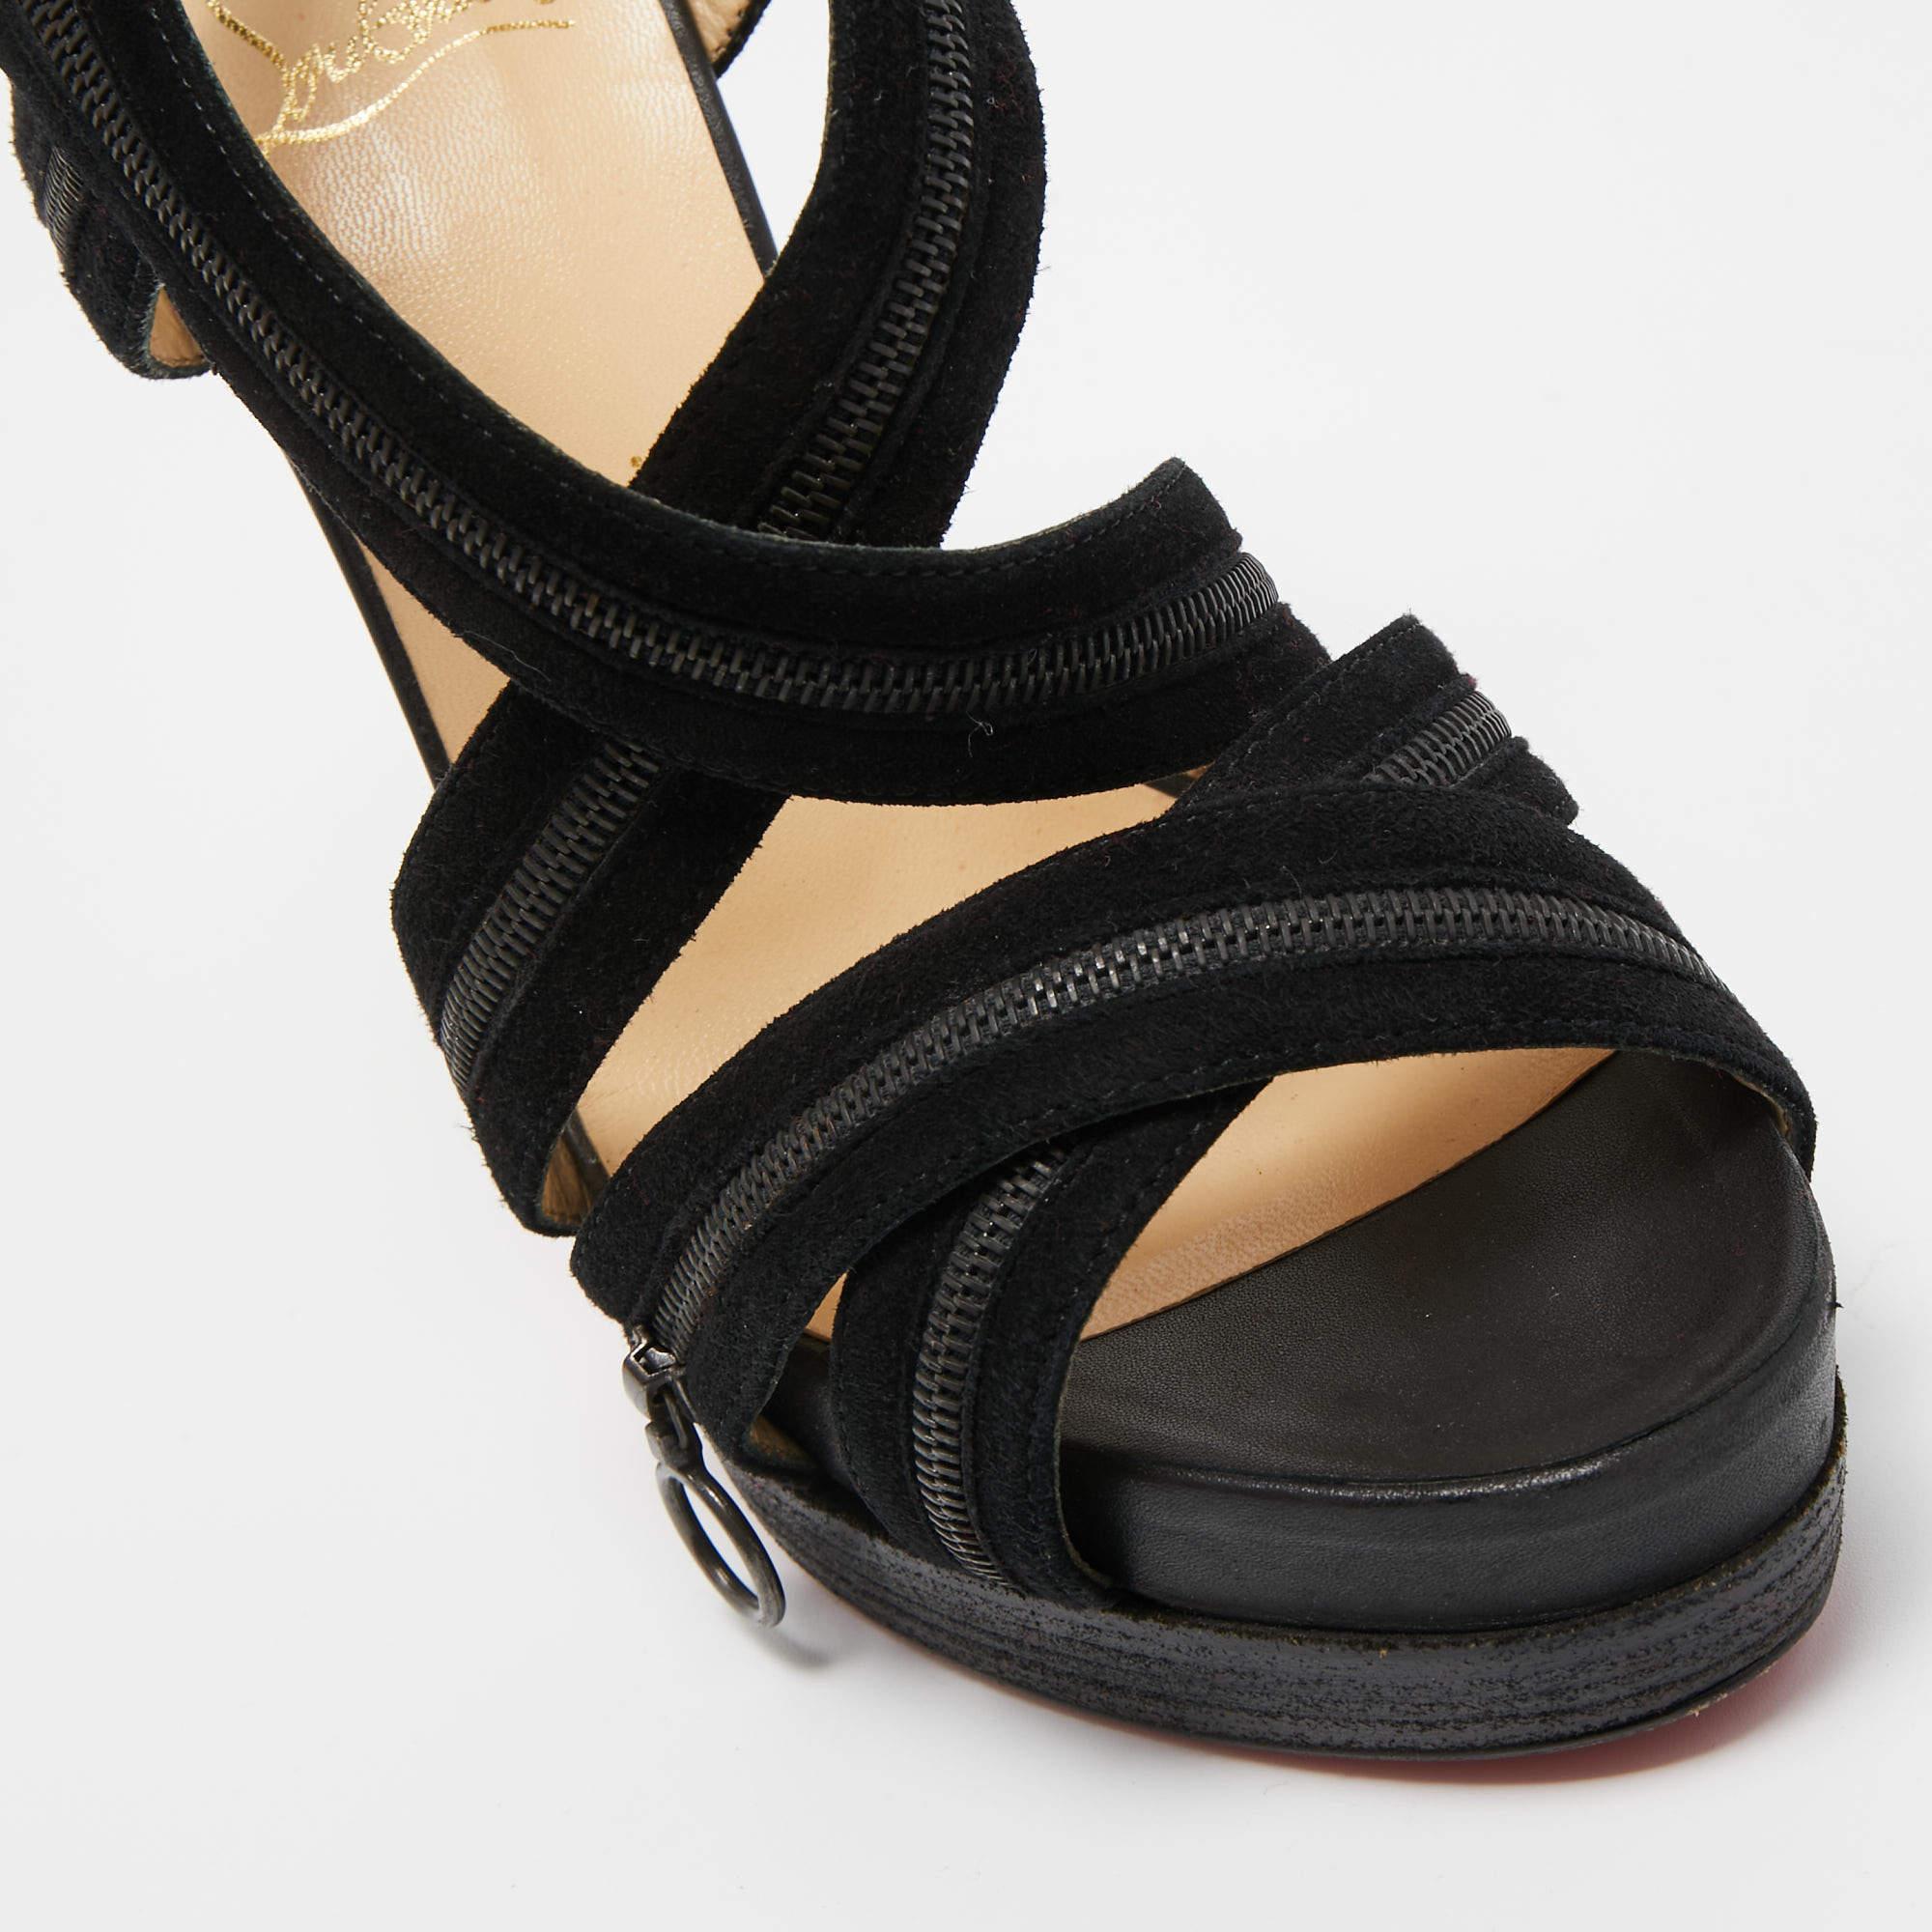 Christian Louboutin Black Suede Rodita Sandals Size 36.5 For Sale 2